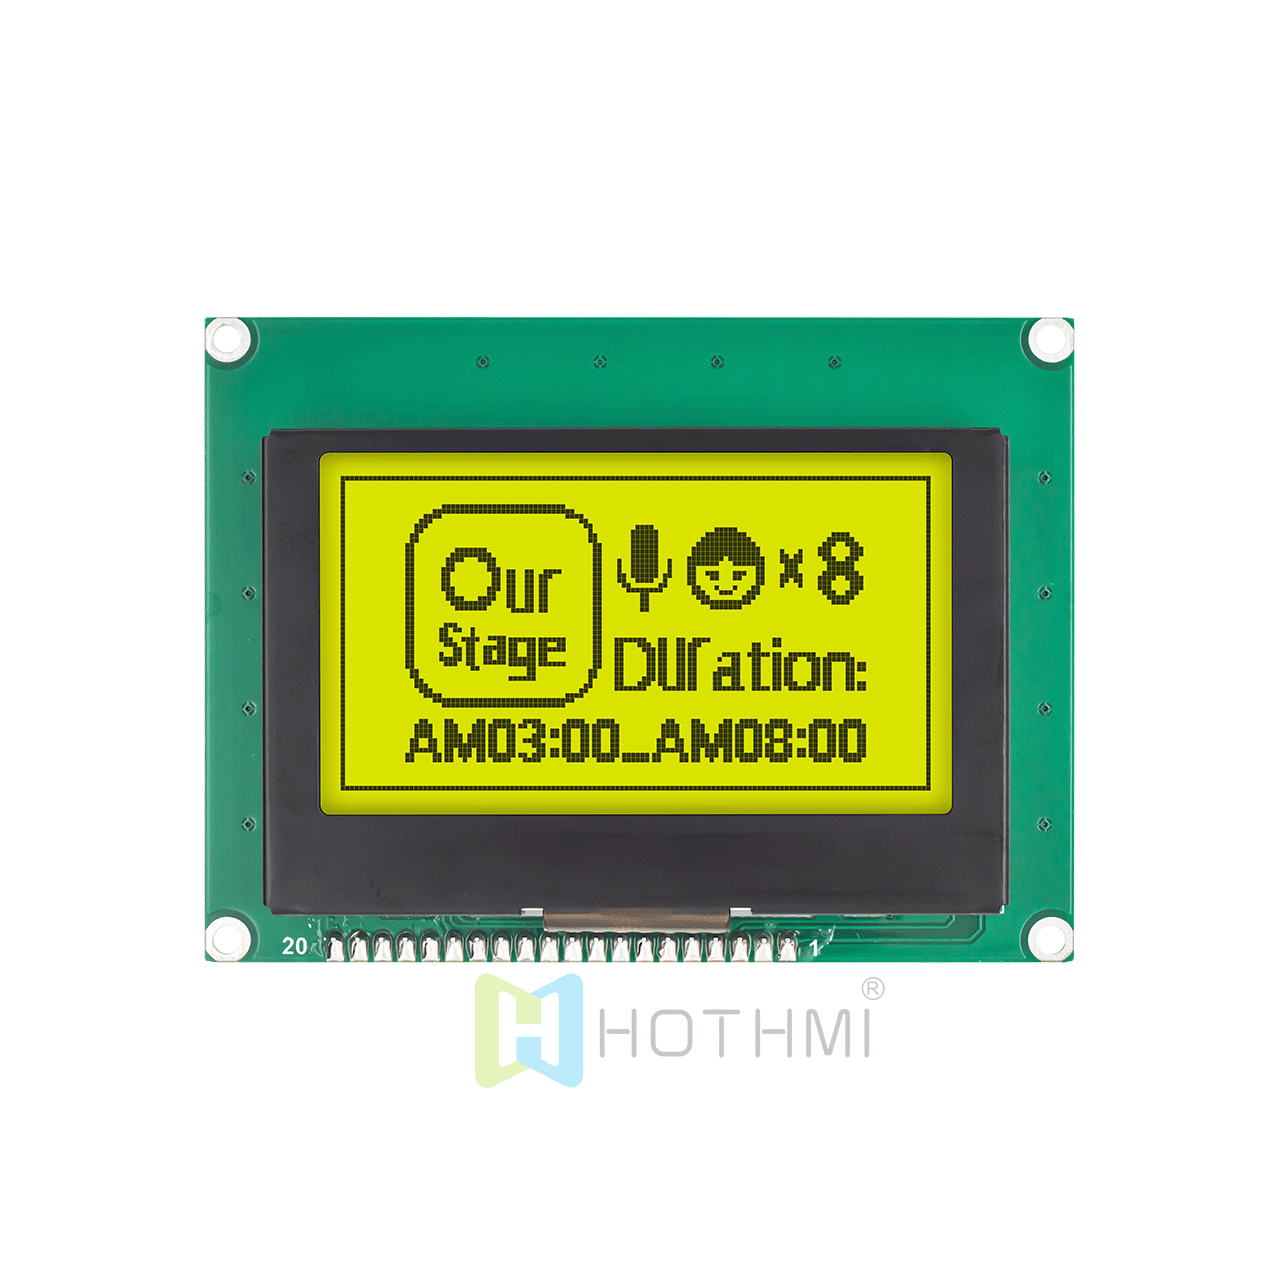 2.7 inch LCD128x64 Graphic LCD Display Module | 128 x 64 Graphic LCD Module | STN+Yellow-Green Backlight | SPI Interface | Adruino